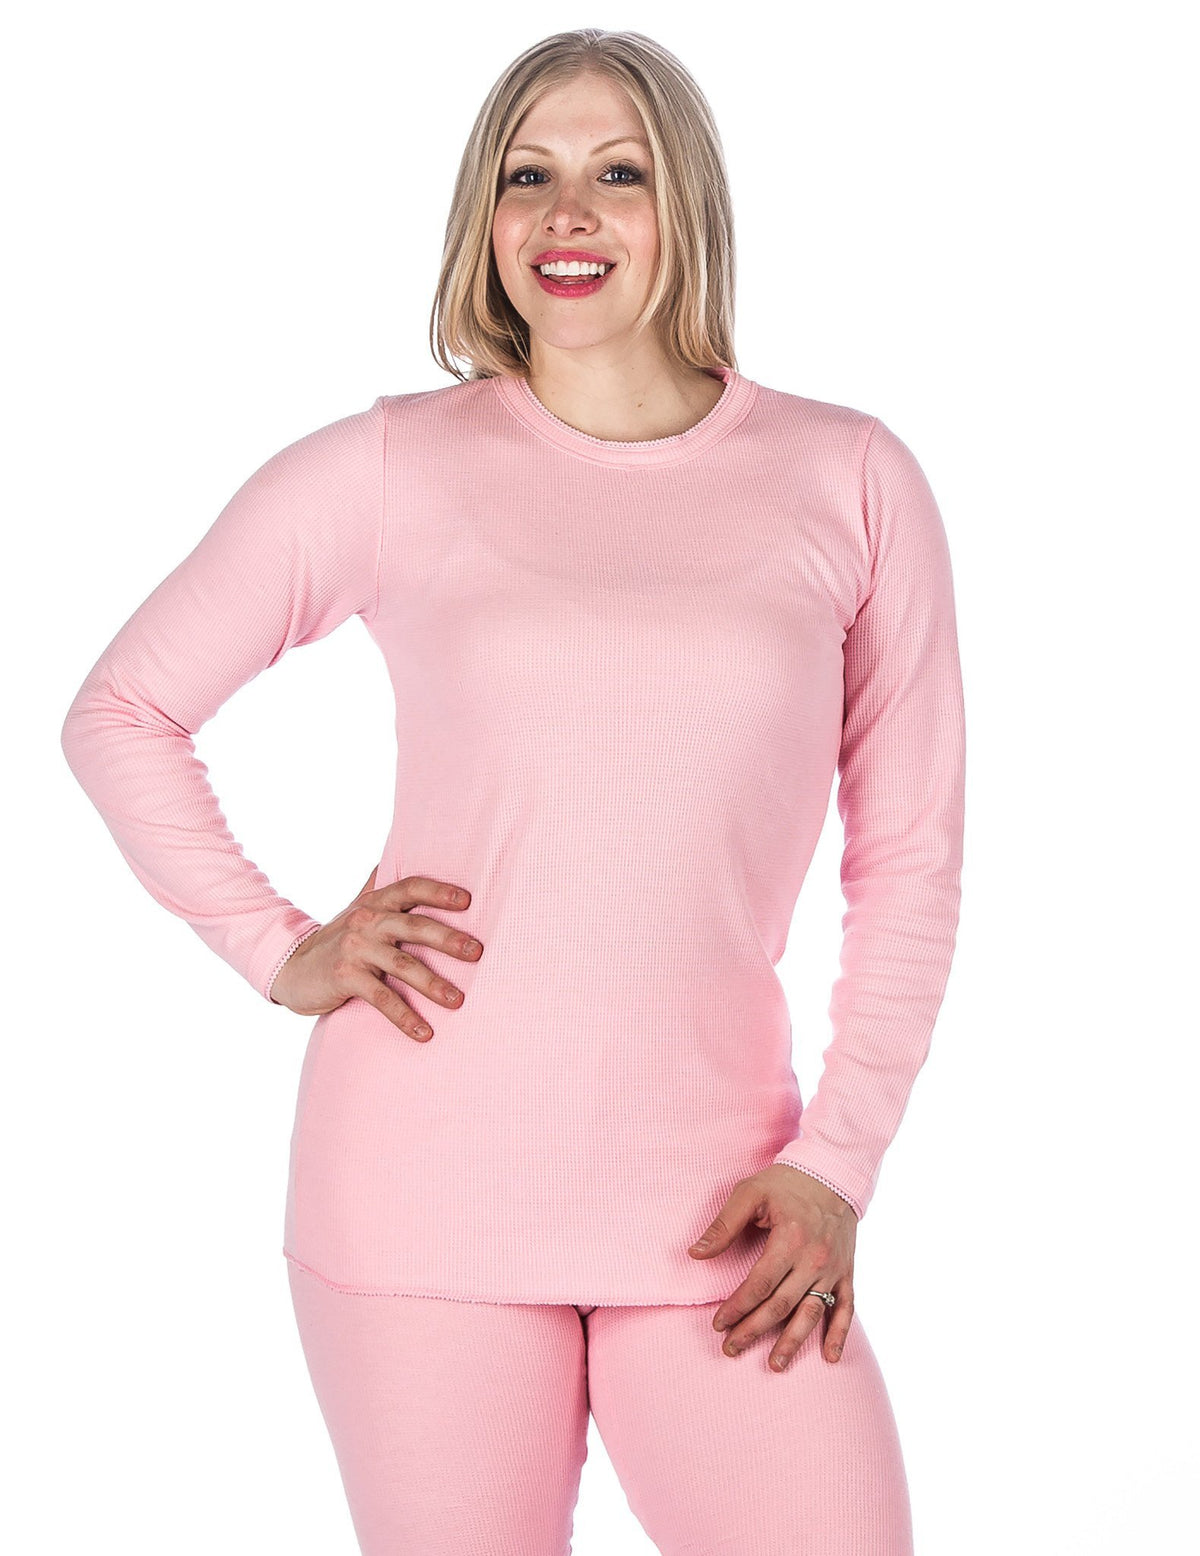 Women's Classic Waffle Knit Thermal Crew Top - Pink